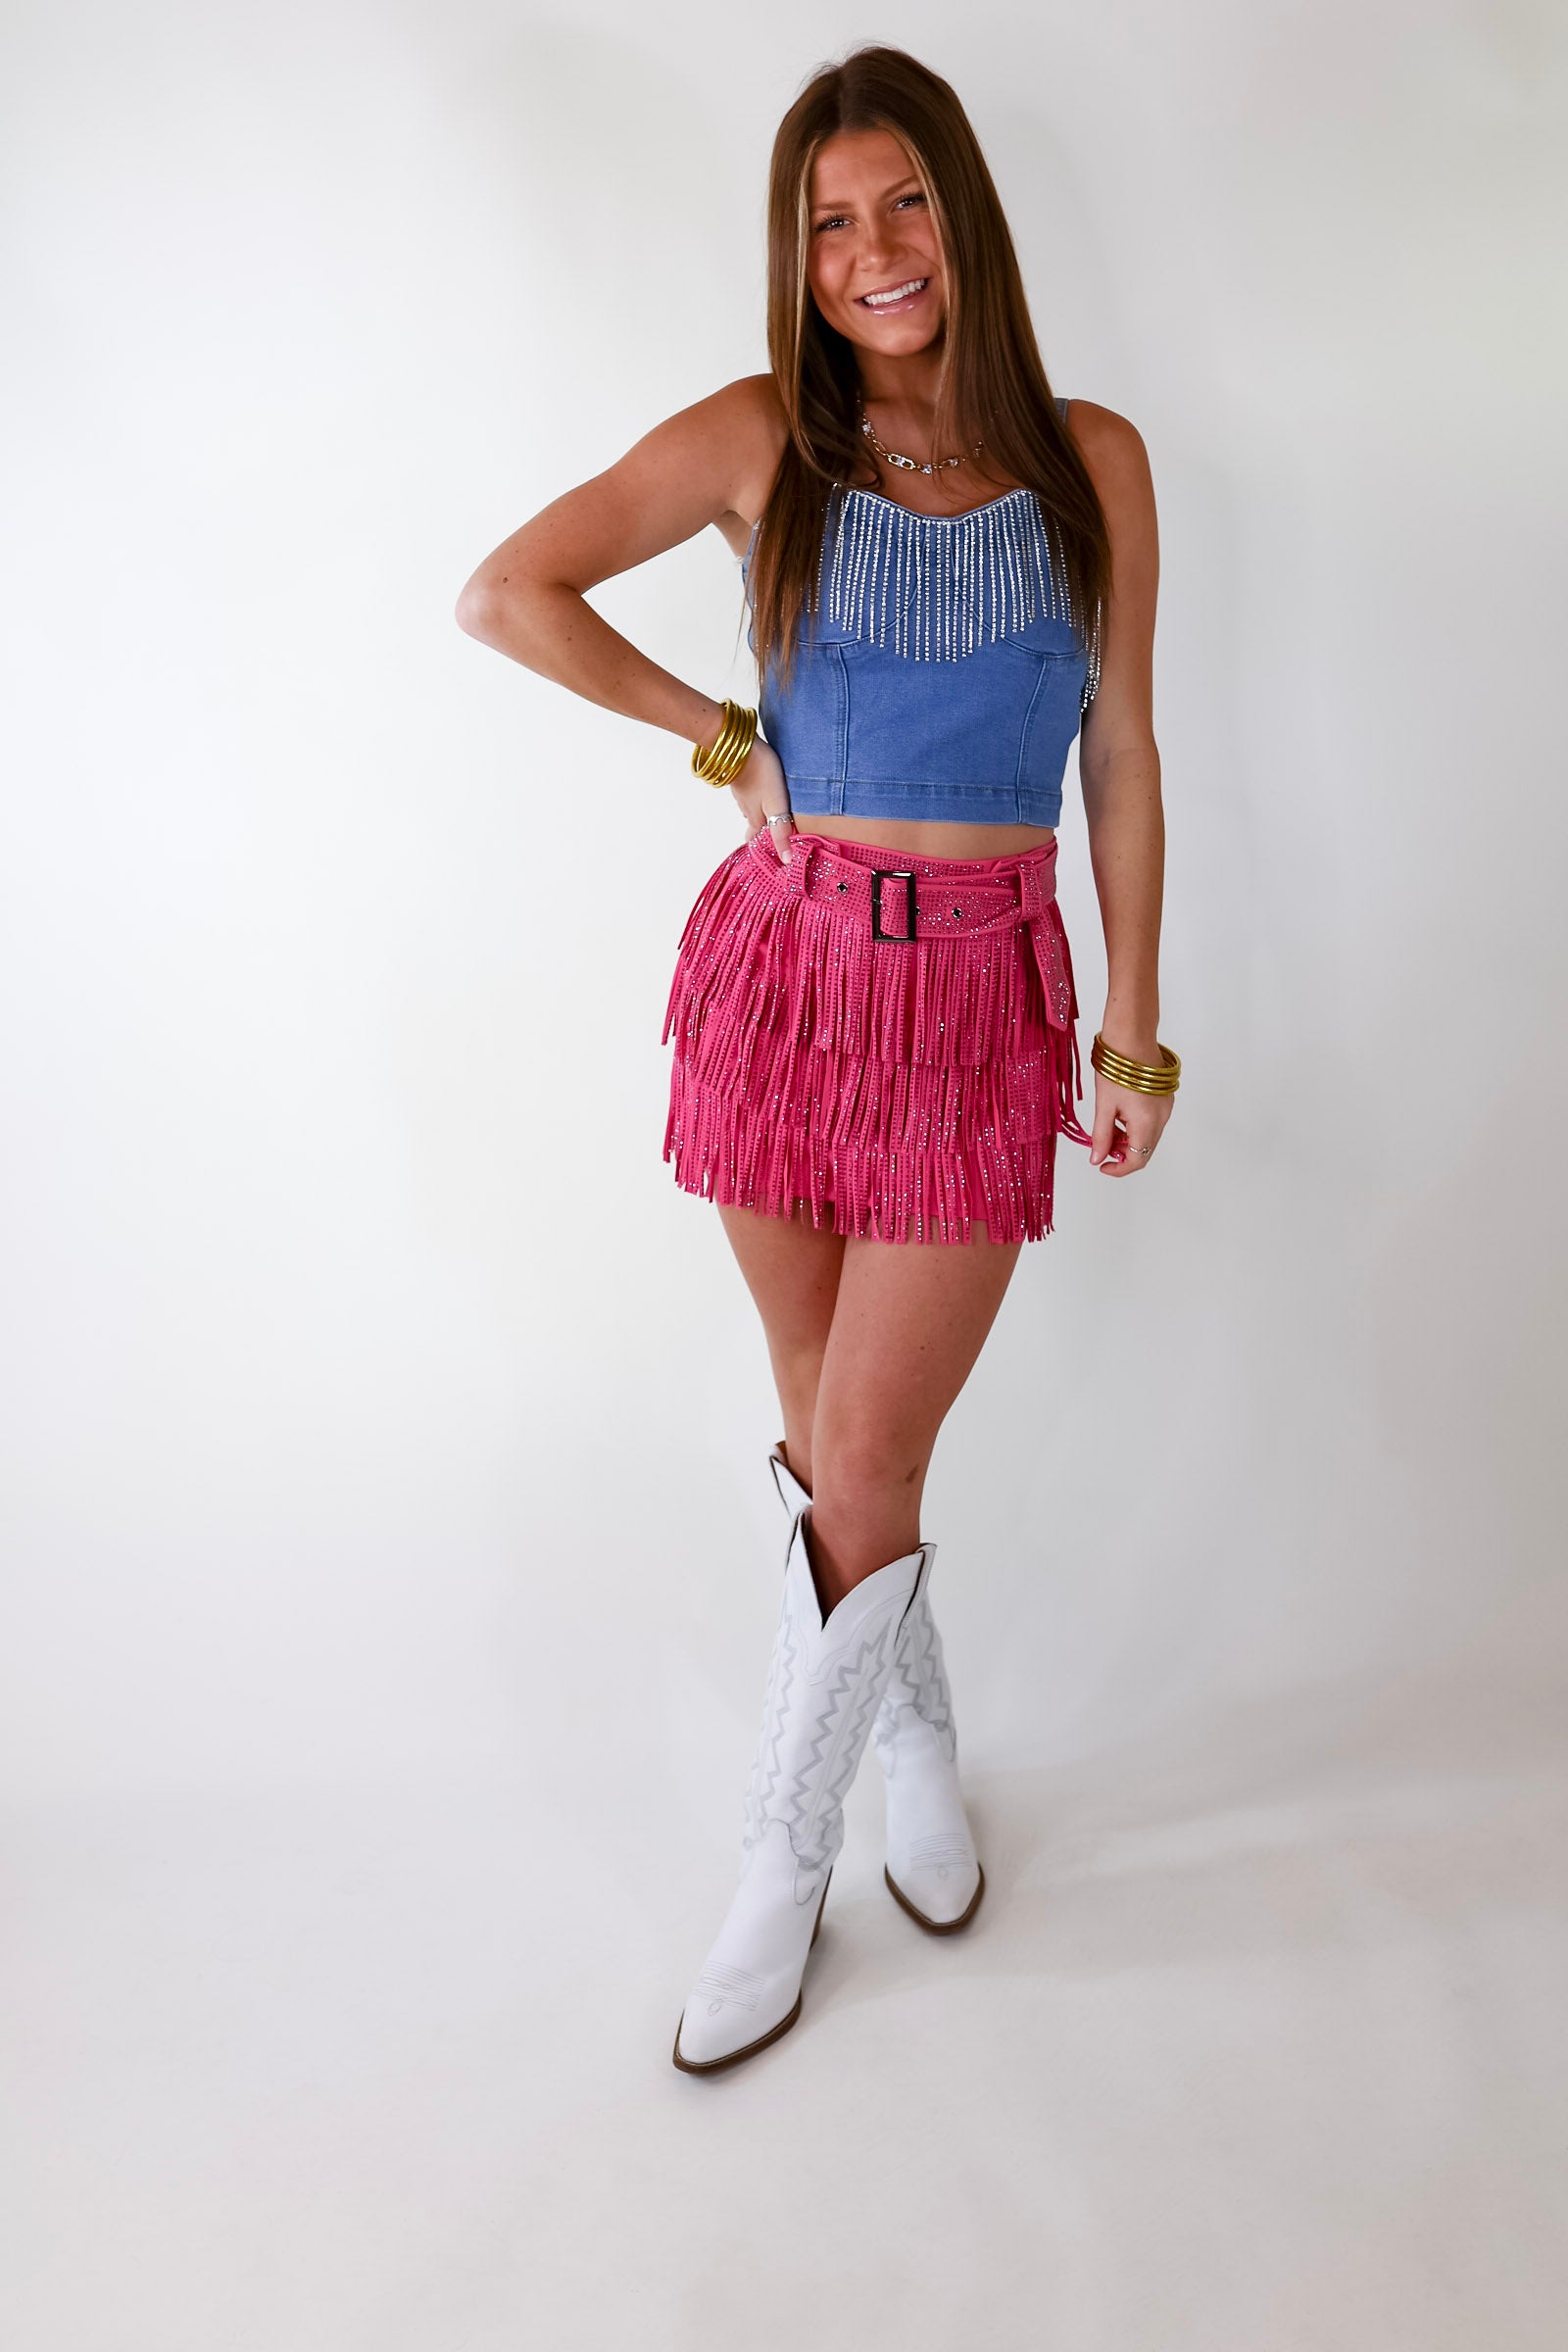 Broadway Lights Crystal Fringe Crop Top with Spaghetti Straps in Denim - Giddy Up Glamour Boutique